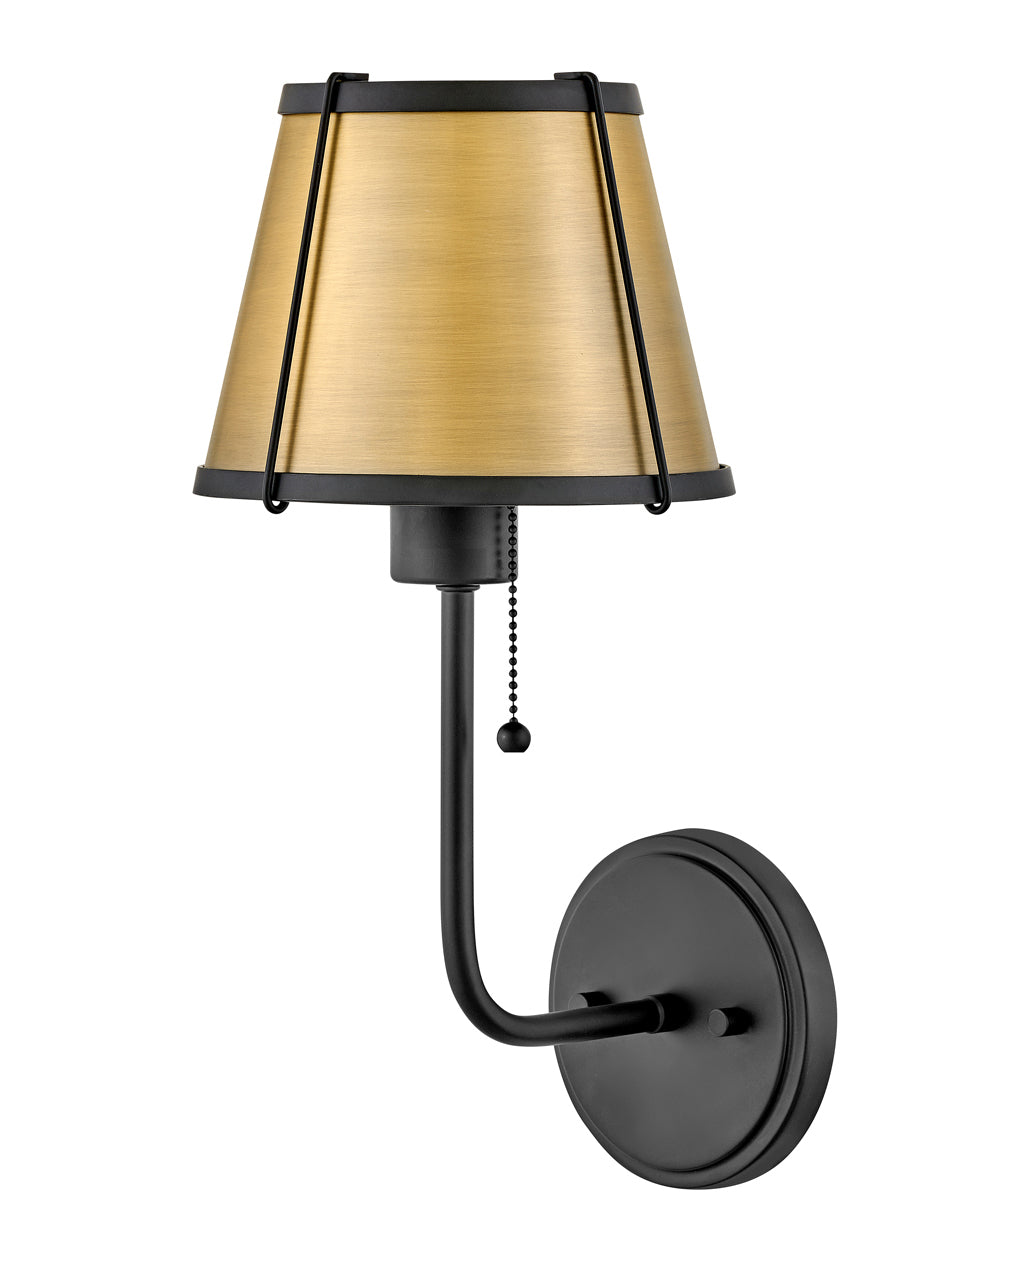 Hinkley Clarke Sconce Sconce Hinkley Black with Lacquered Dark Brass accents 8.75x7.25x15.75 